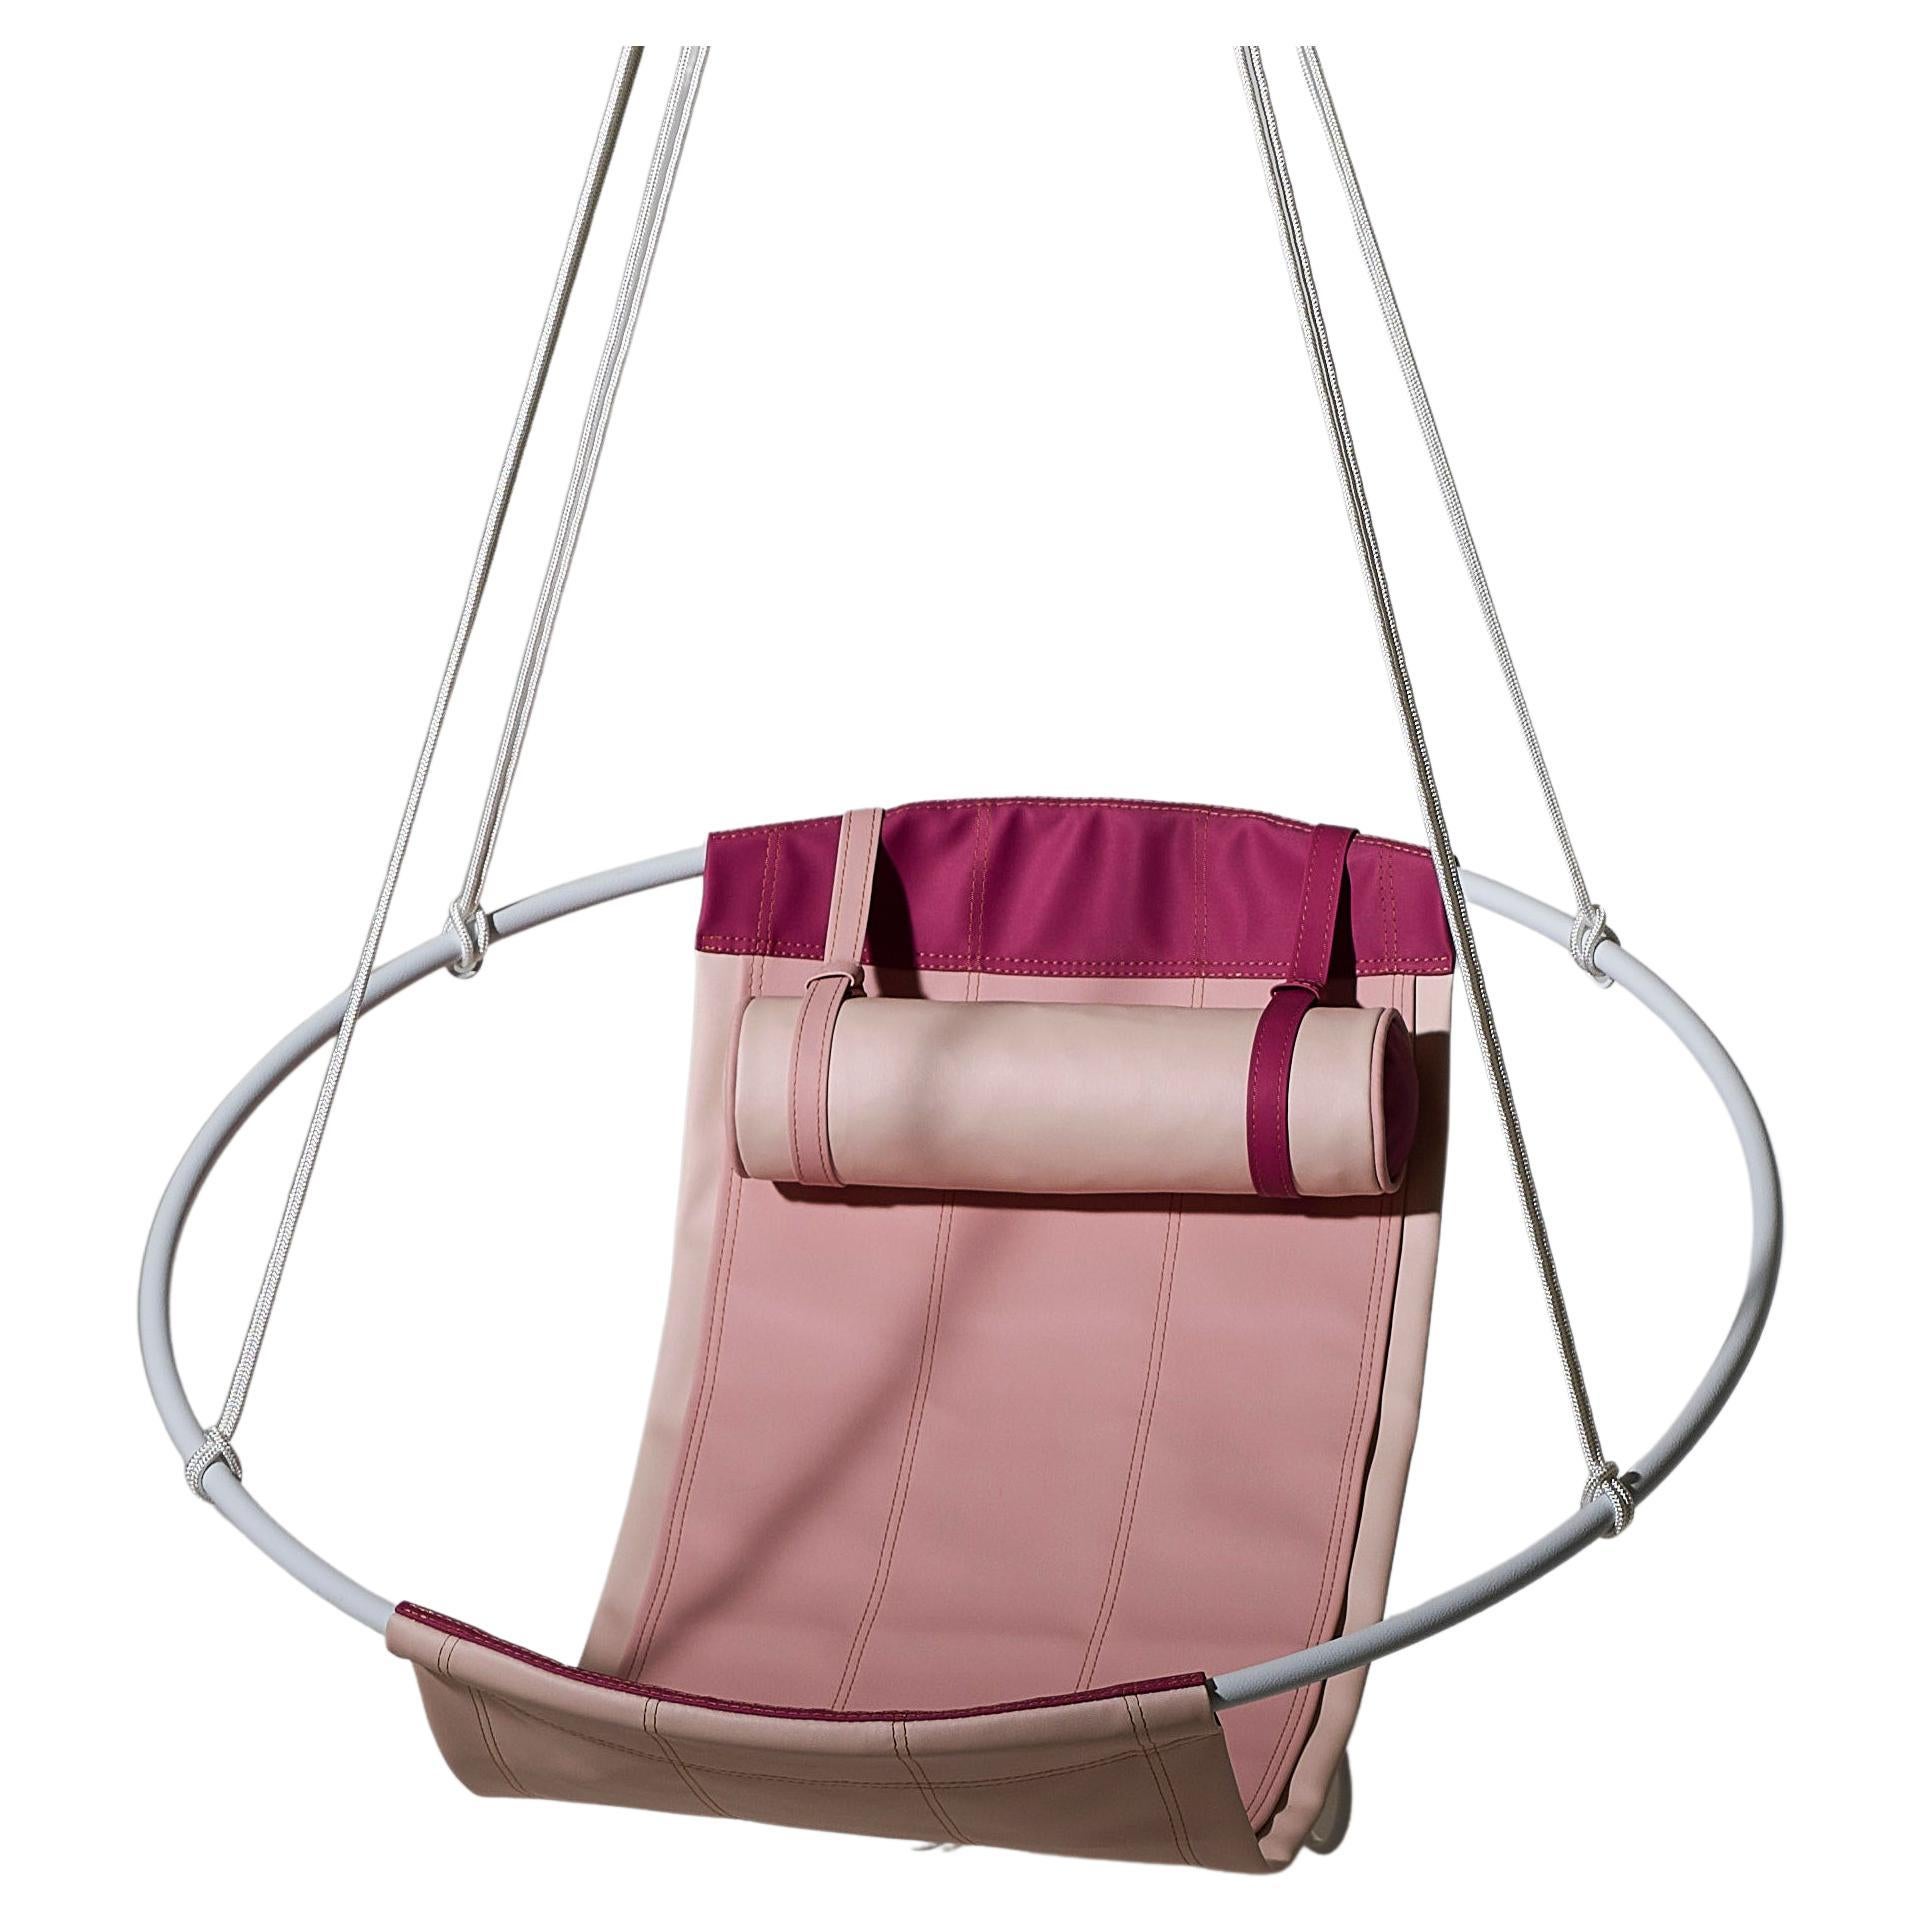 Modern Chic Outdoor Sling Hanging Chair - Pink